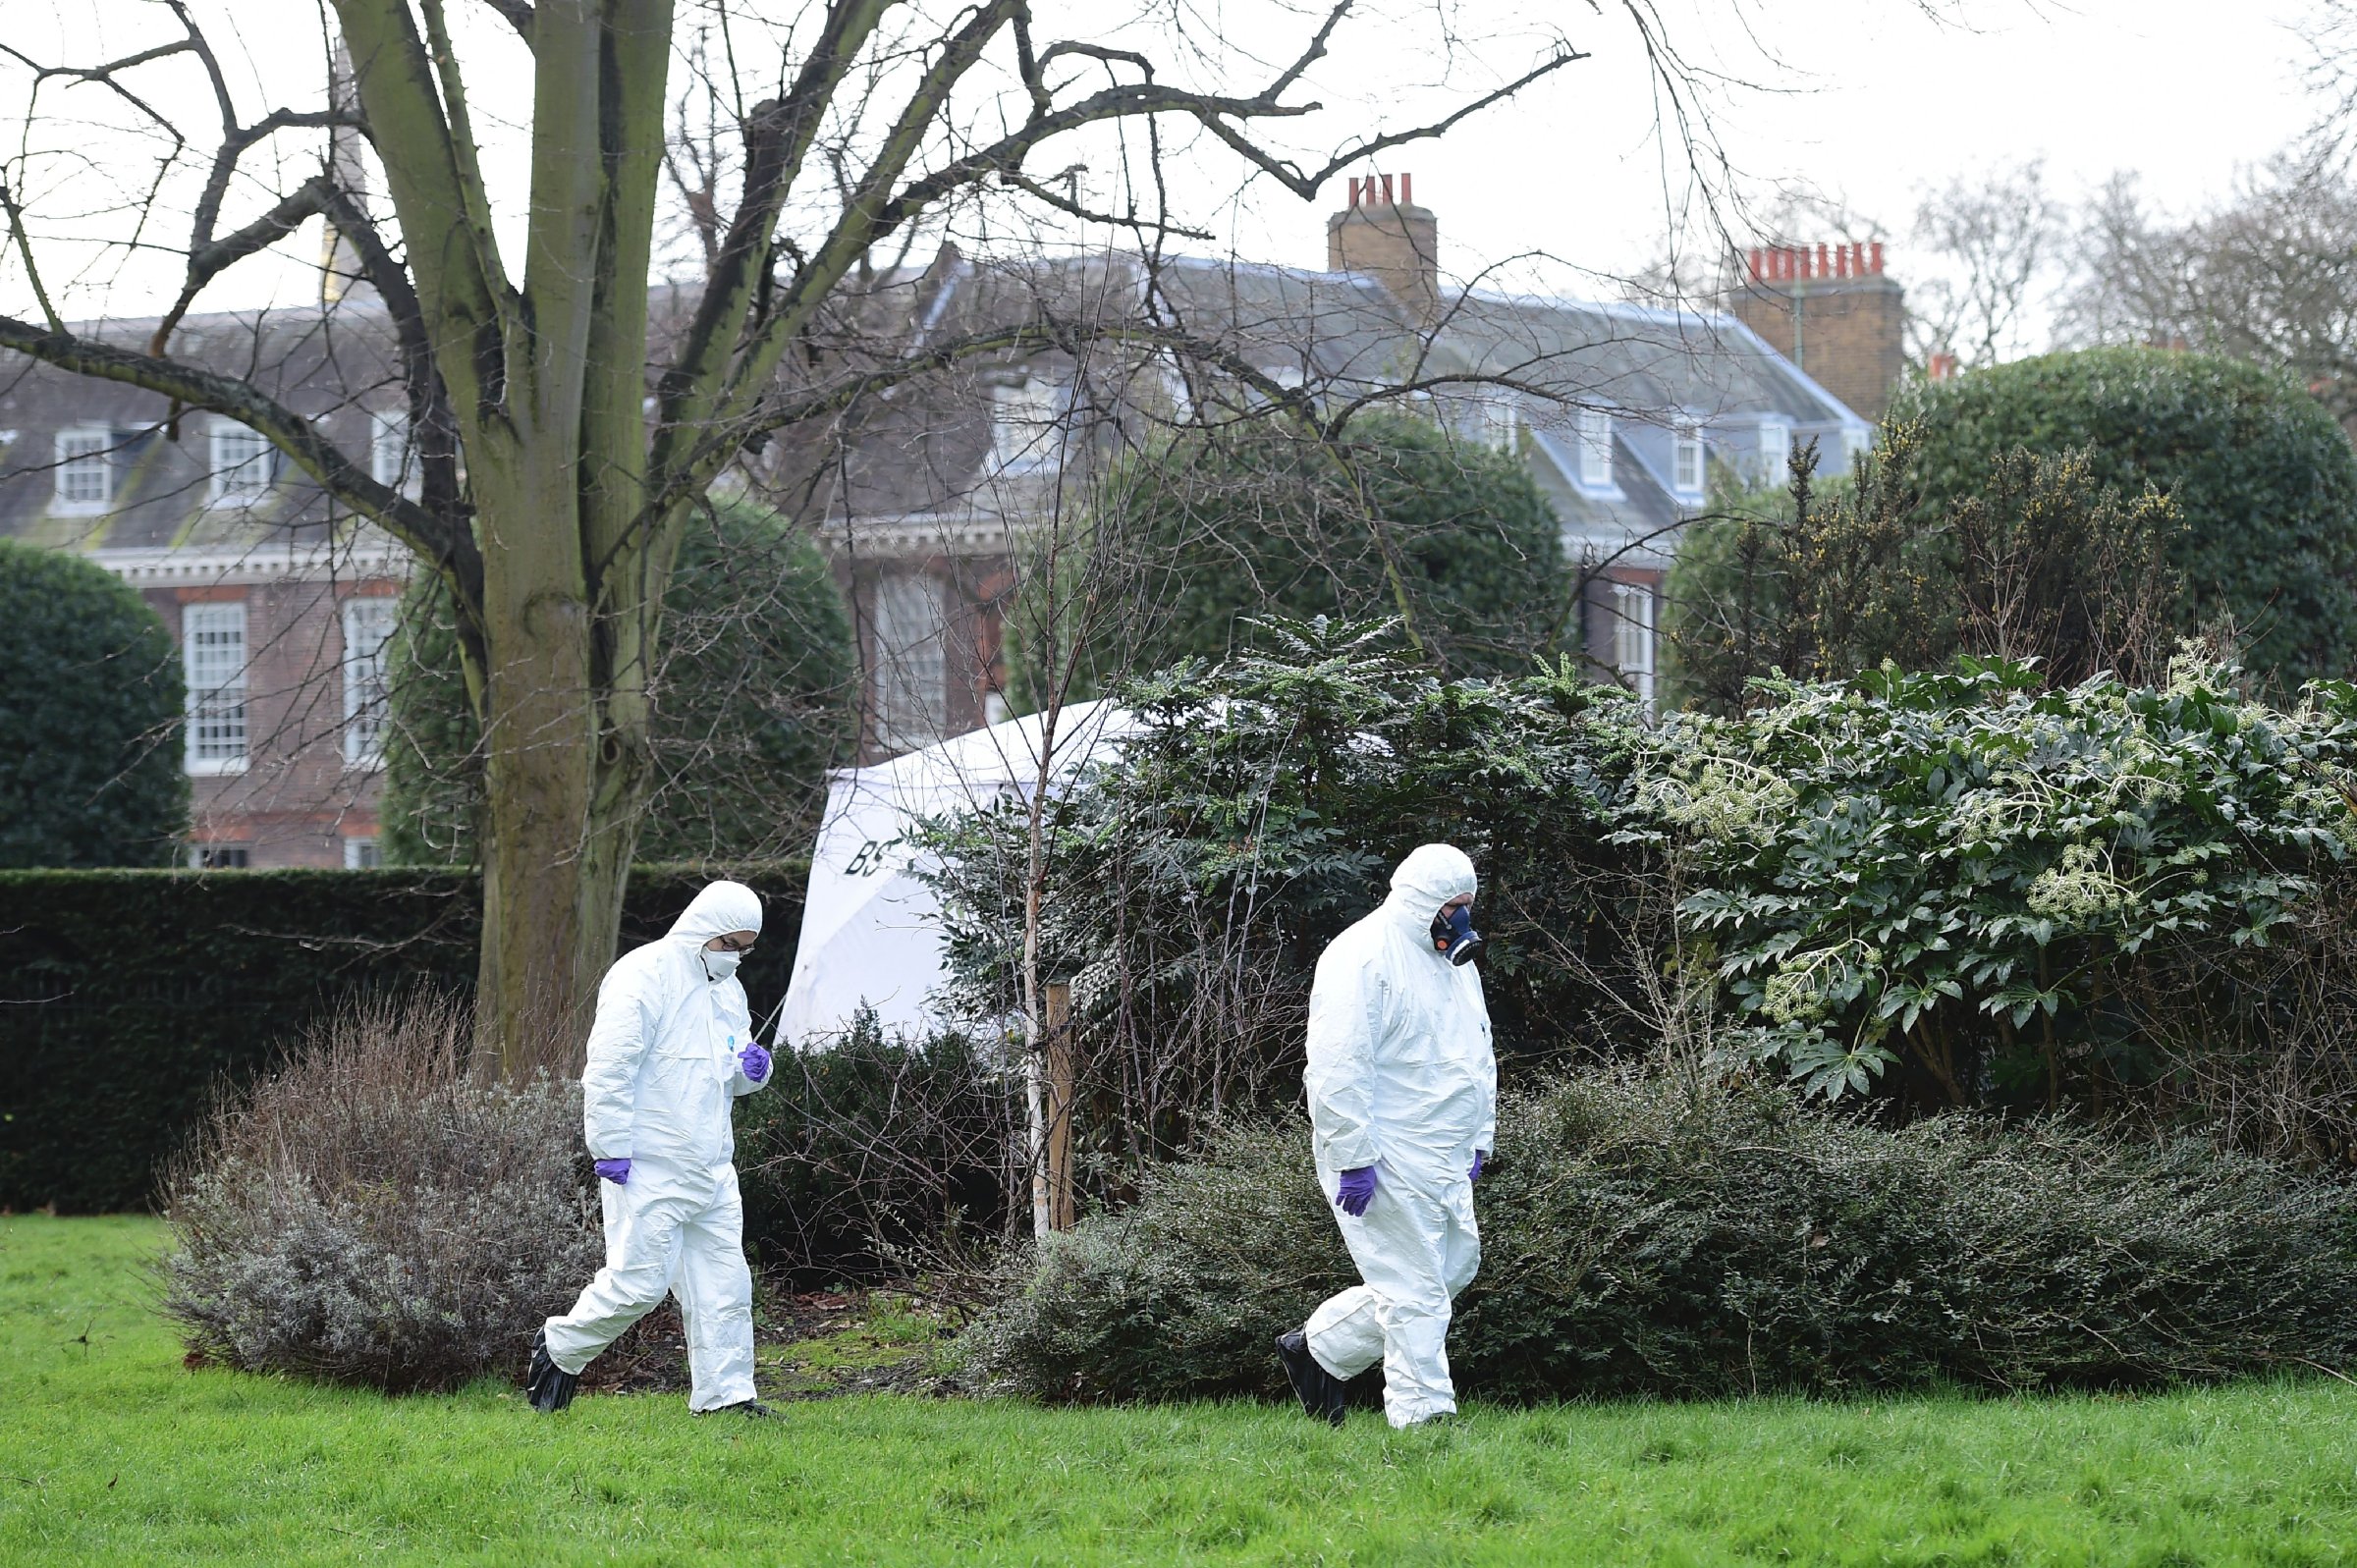 Forensics officers in overalls and masks walk by the tent errected over the scene where a man died after being discovered on fire in the park outside the wall of Kensington Palace in London on Feb. 9, 2016.